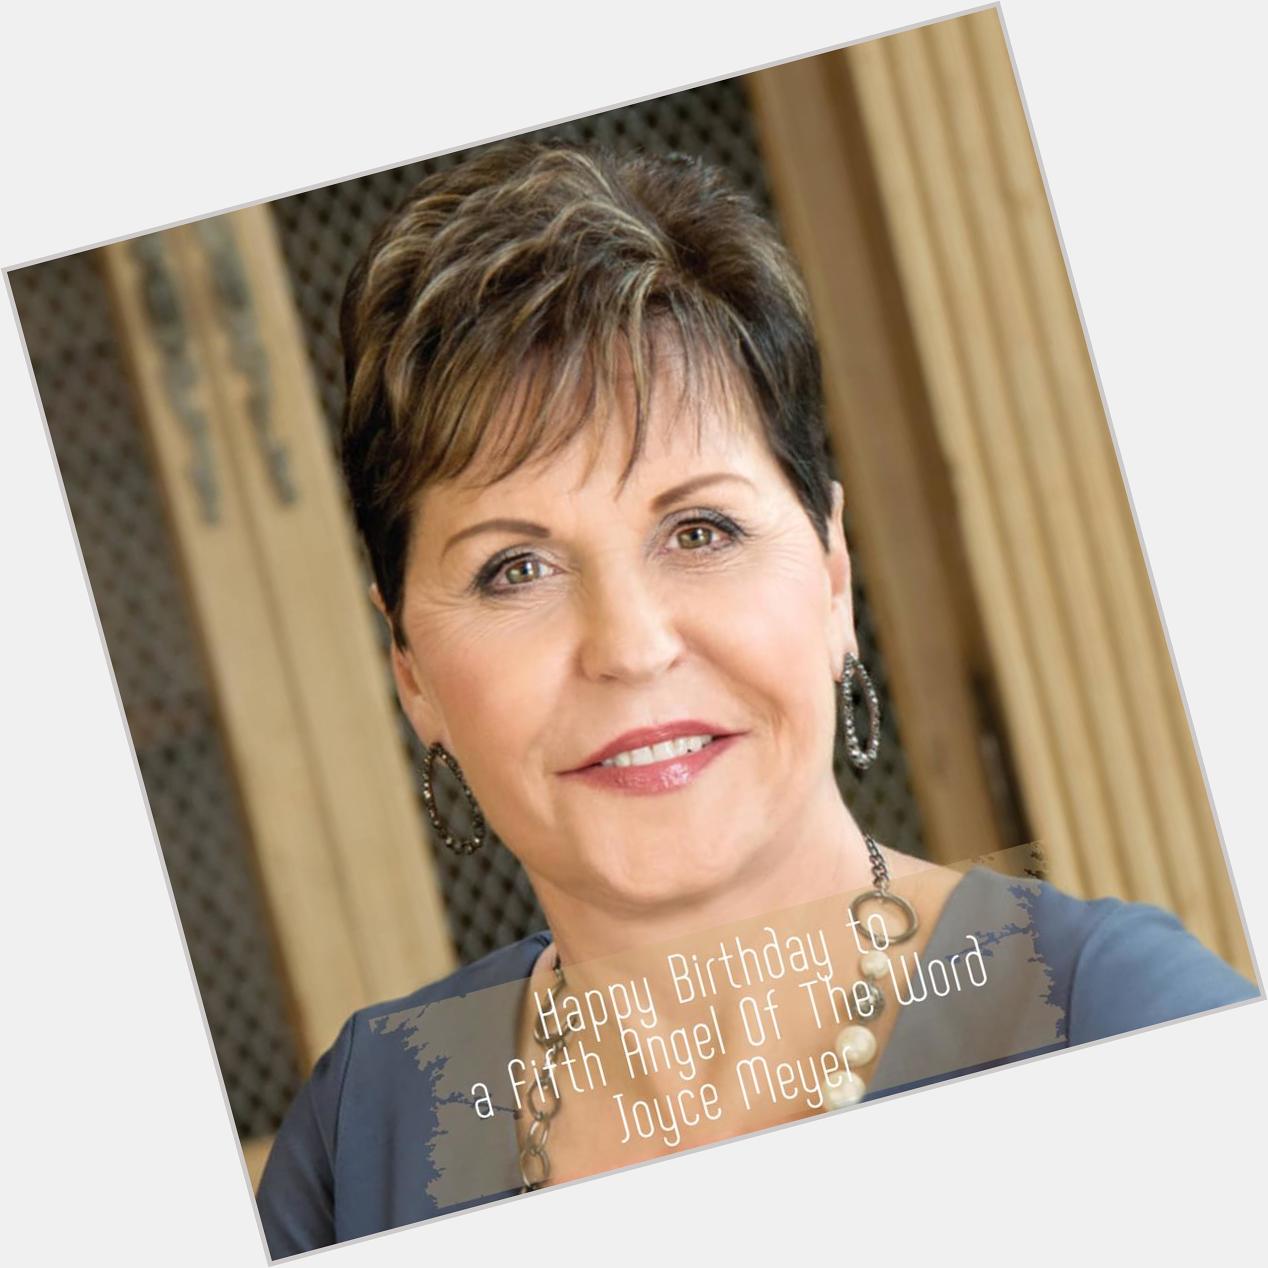 Happy Birthday to a Fifth Angel Of The Word, Joyce Meyer. 